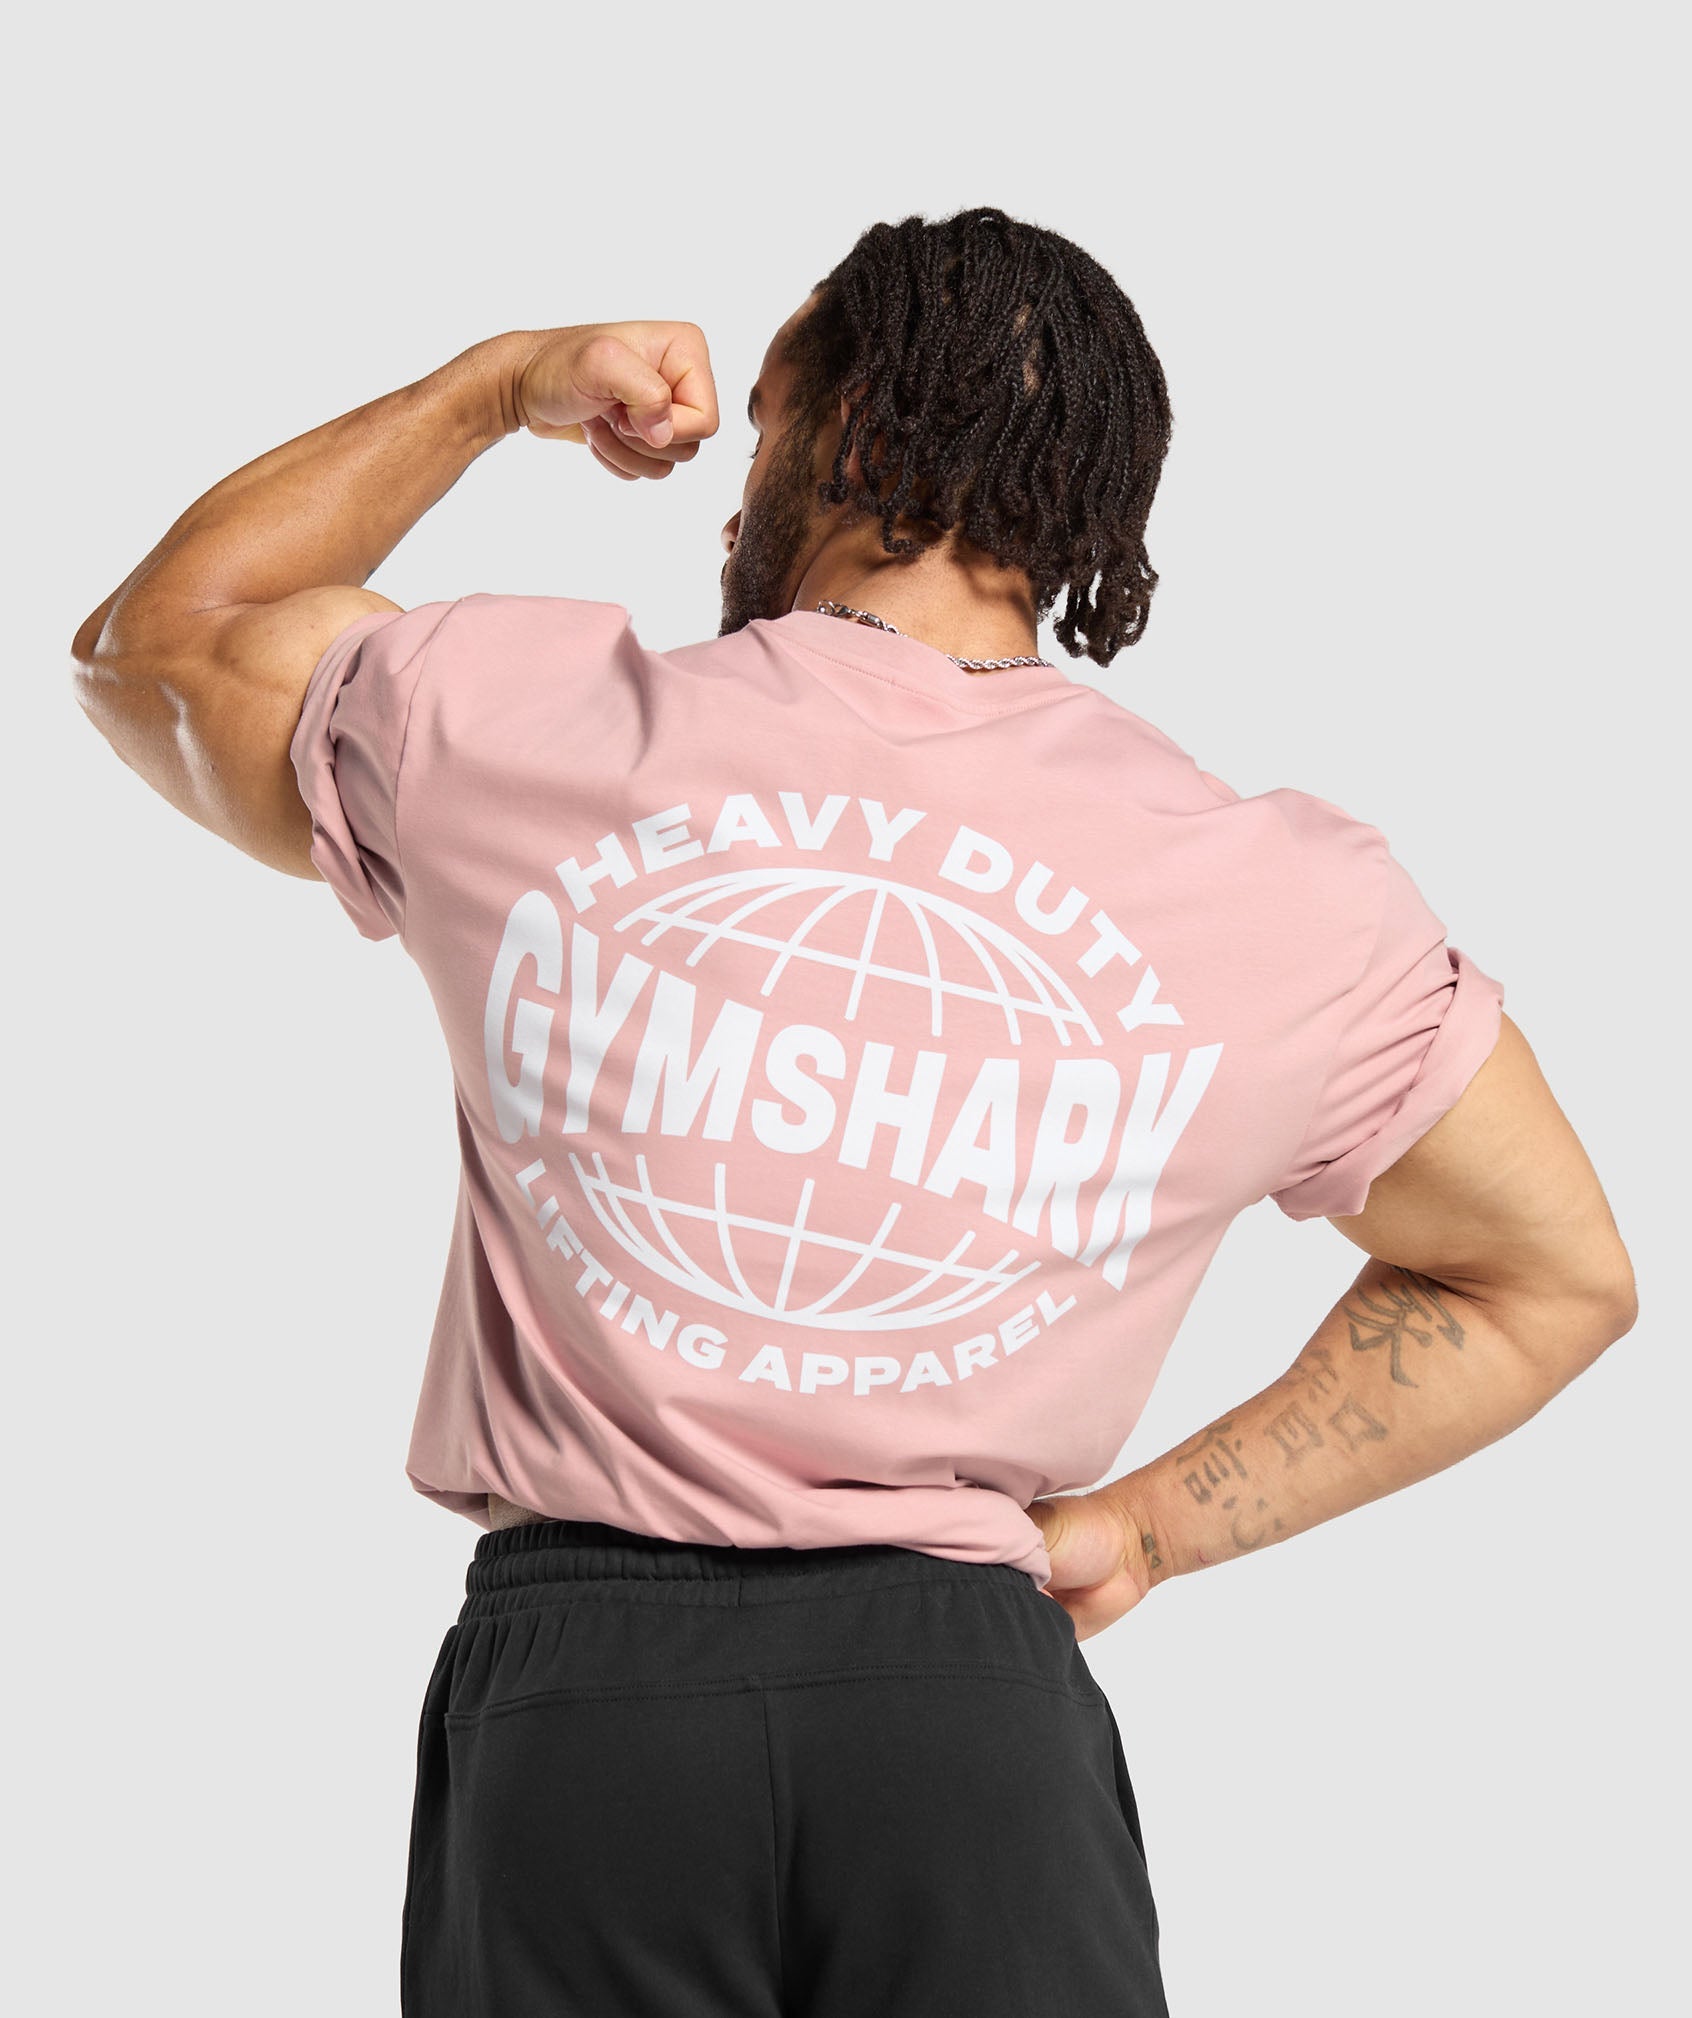 Heavy Duty Apparel T-Shirt in Light Pink - view 6